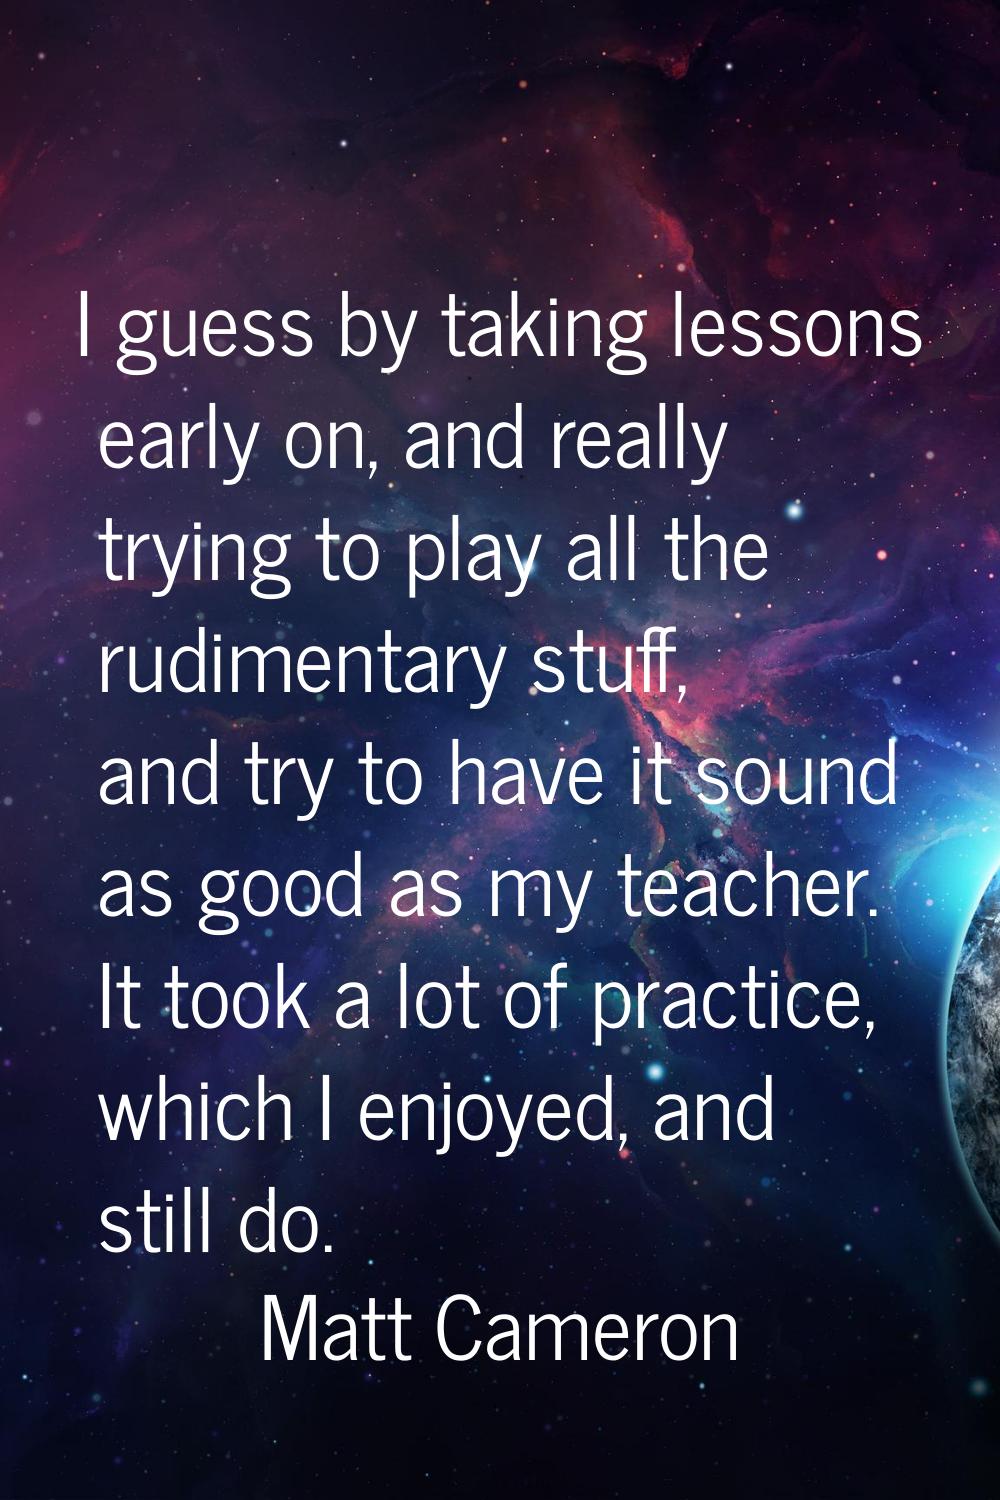 I guess by taking lessons early on, and really trying to play all the rudimentary stuff, and try to